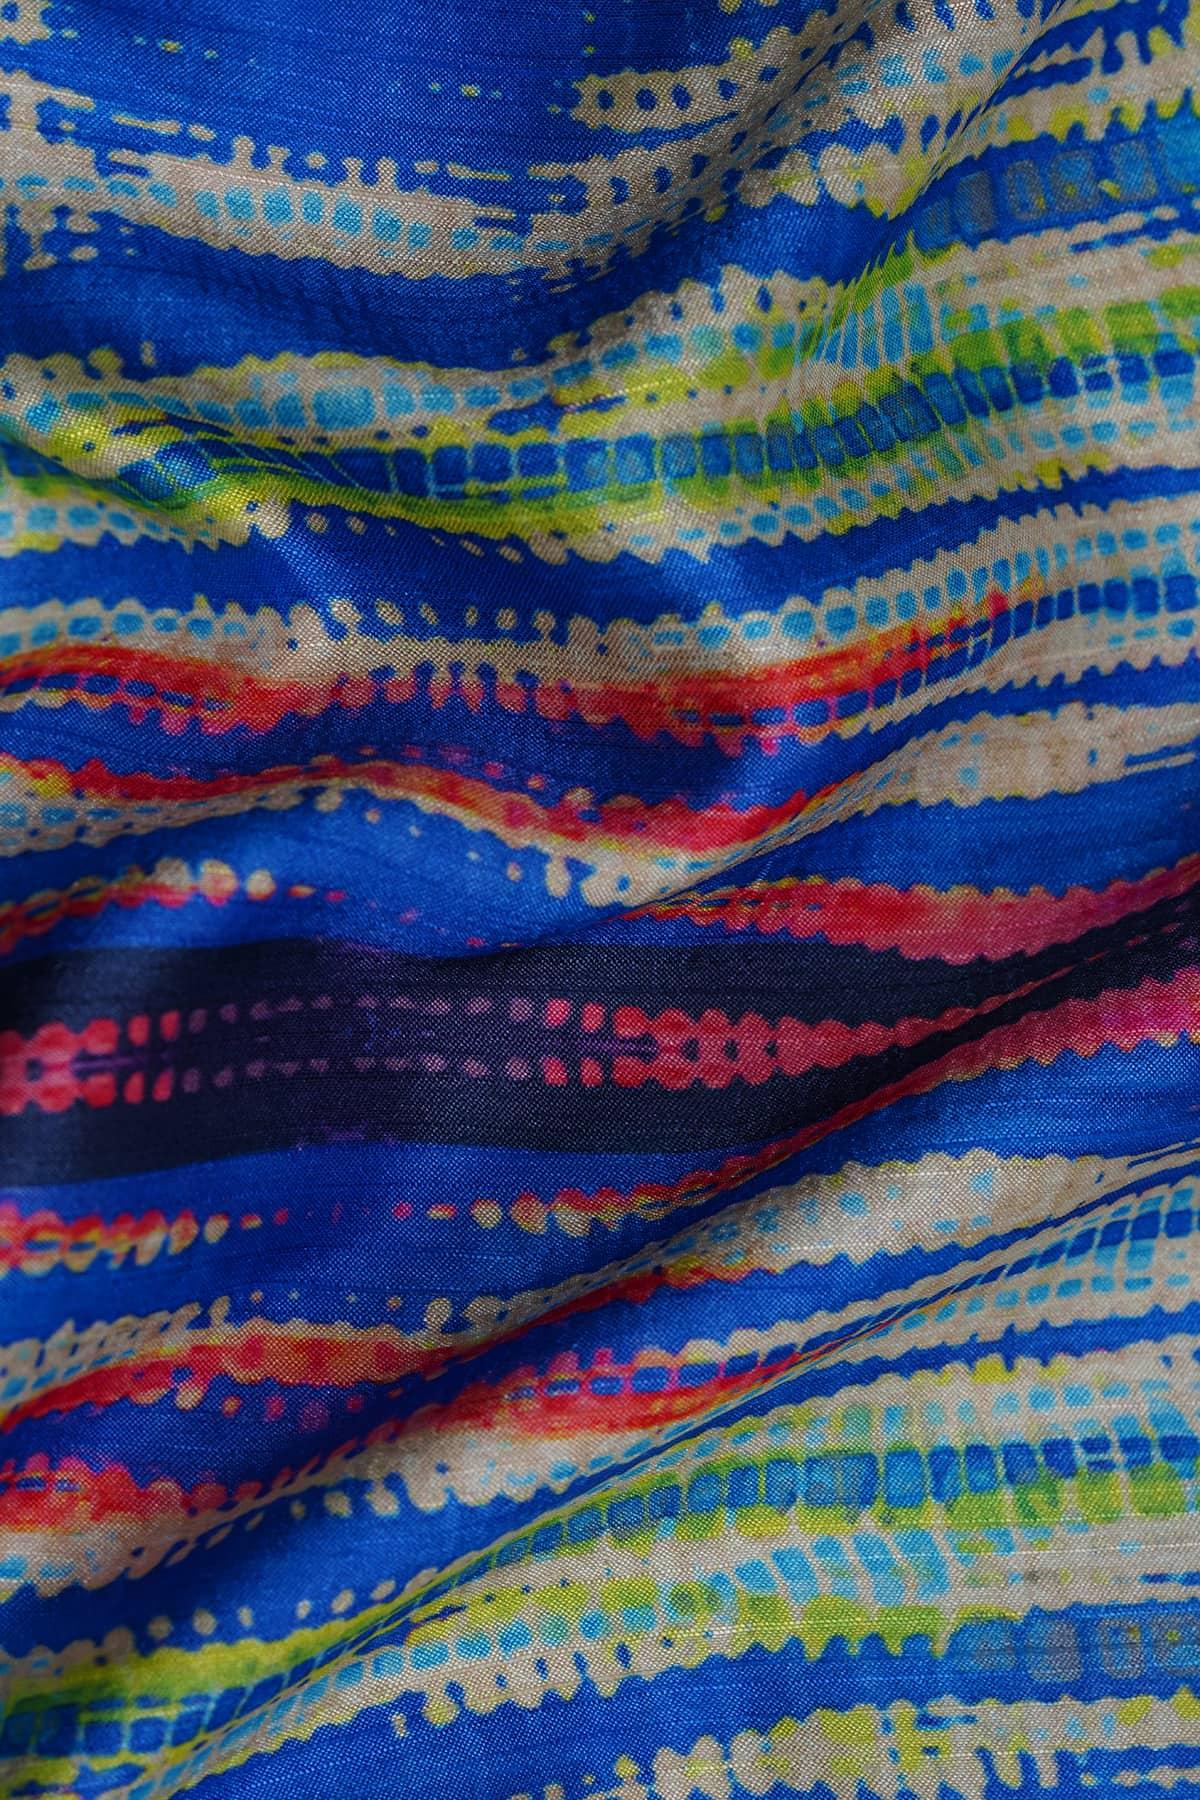 Abstract Tie and Dye Pattern Digitally Printed on Alina Silk - saraaha.com - Accessories, Casual, Comfy Casual, comfy casuals, Dazzling Festive Collection, Digital Print, Festive, Home Decor, Kurtas, Kurtis, Men's wear collection, Quirky, Shirts, SILK, Skirts, Suits, Tops Dresses, Trimmings, Women Wear